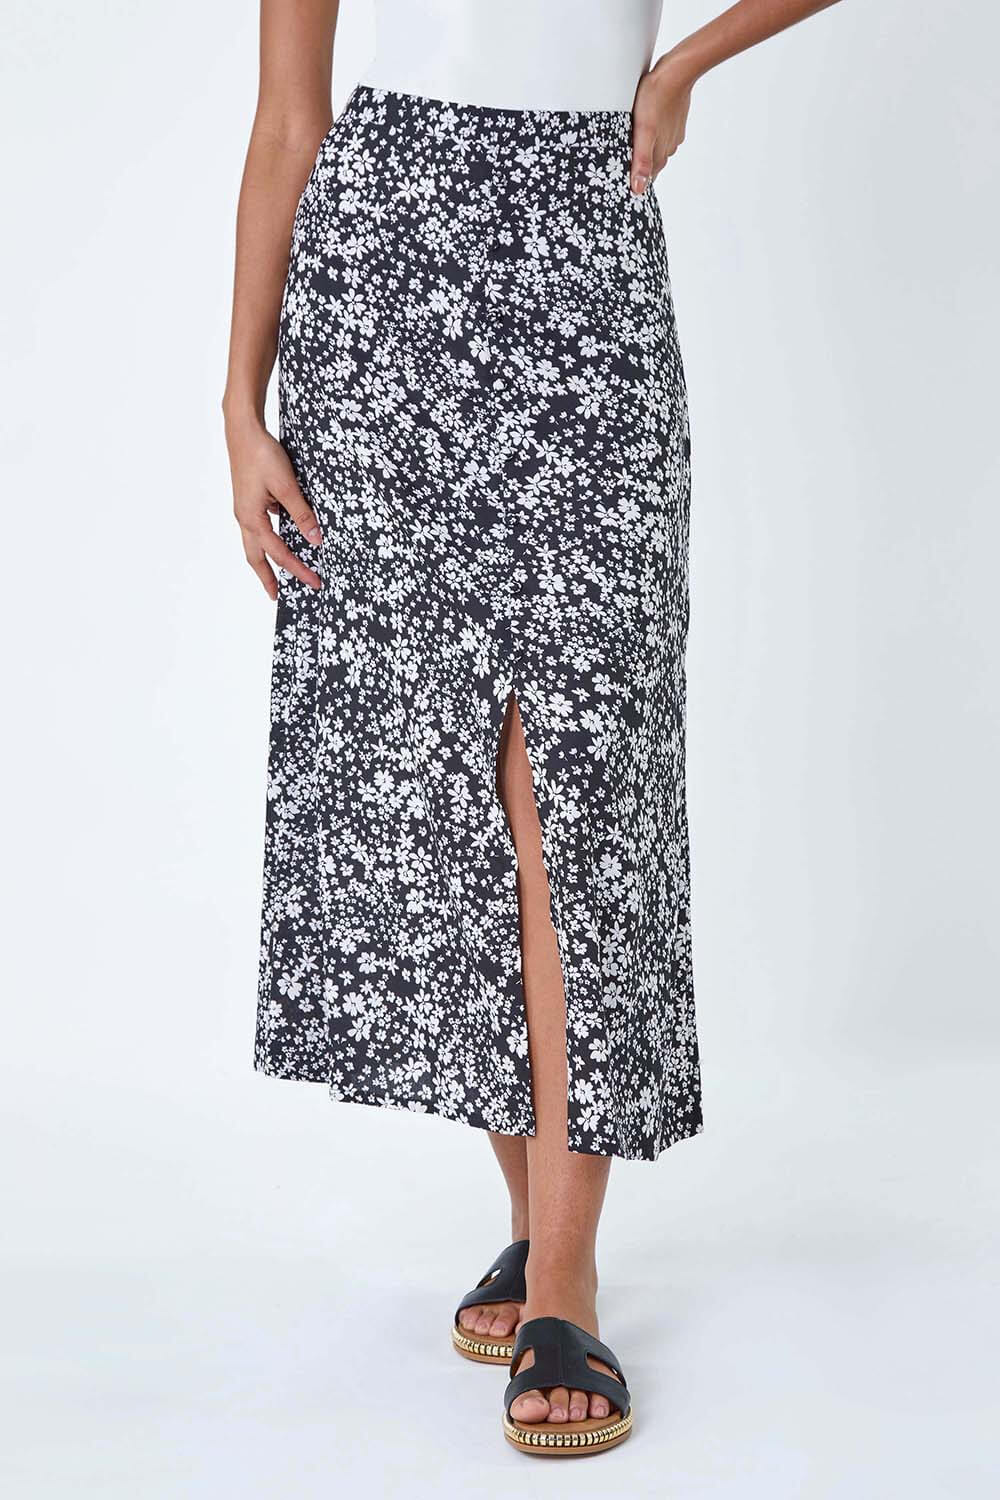 Black Ditsy Floral Button Detail Midi Skirt, Image 4 of 5